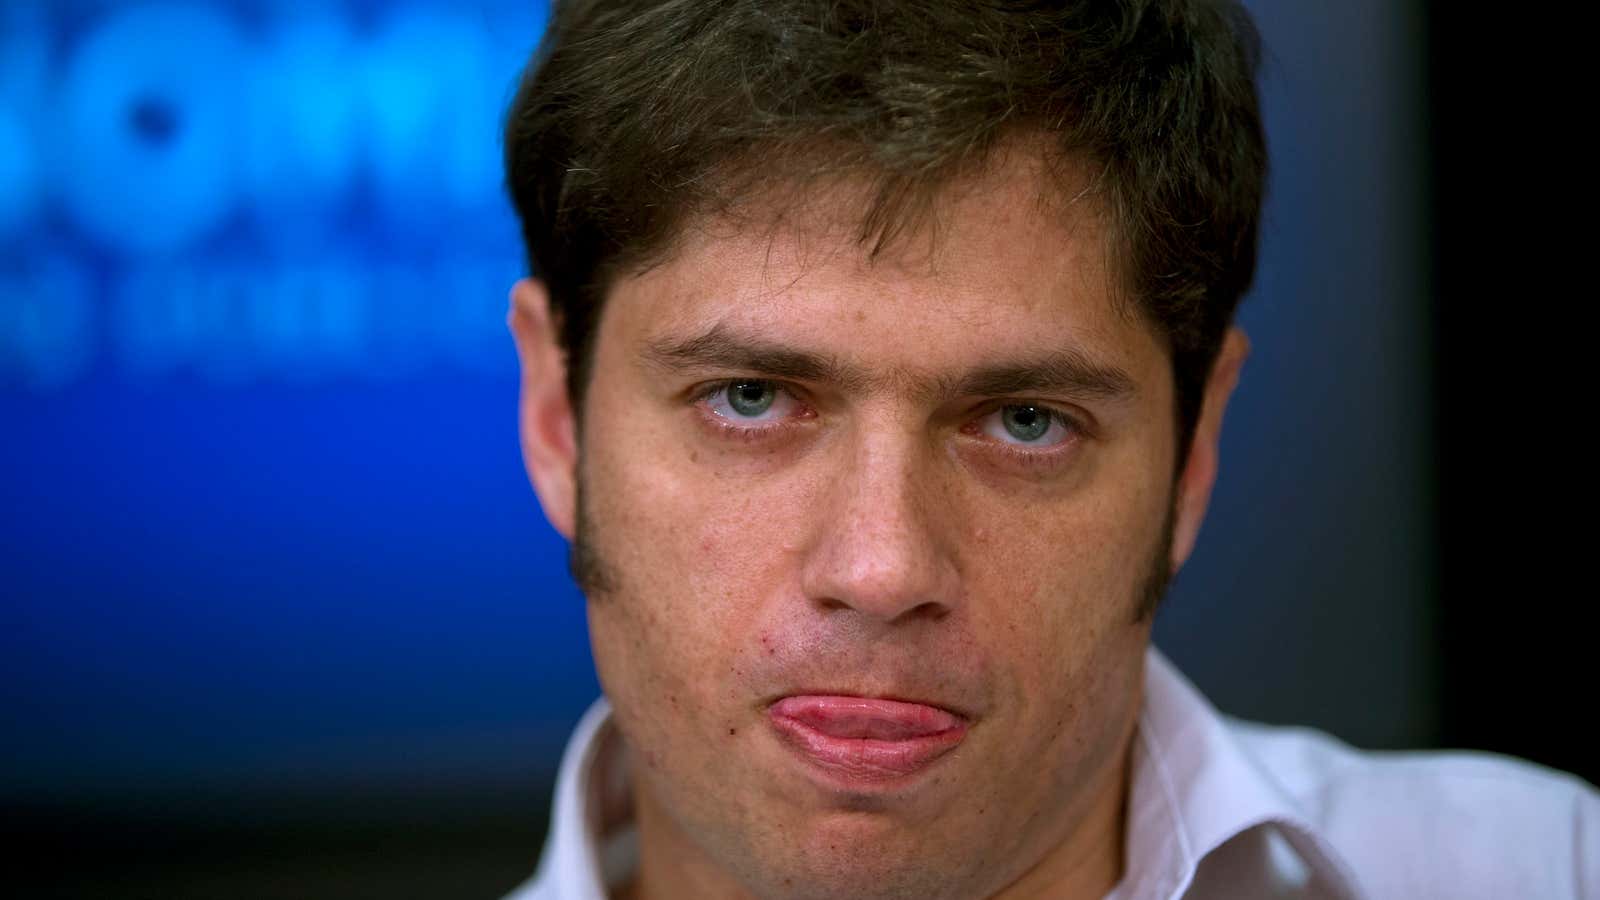 Axel Kicillof, Argentina’s deputy economy minister, thinking up a withering riposte.